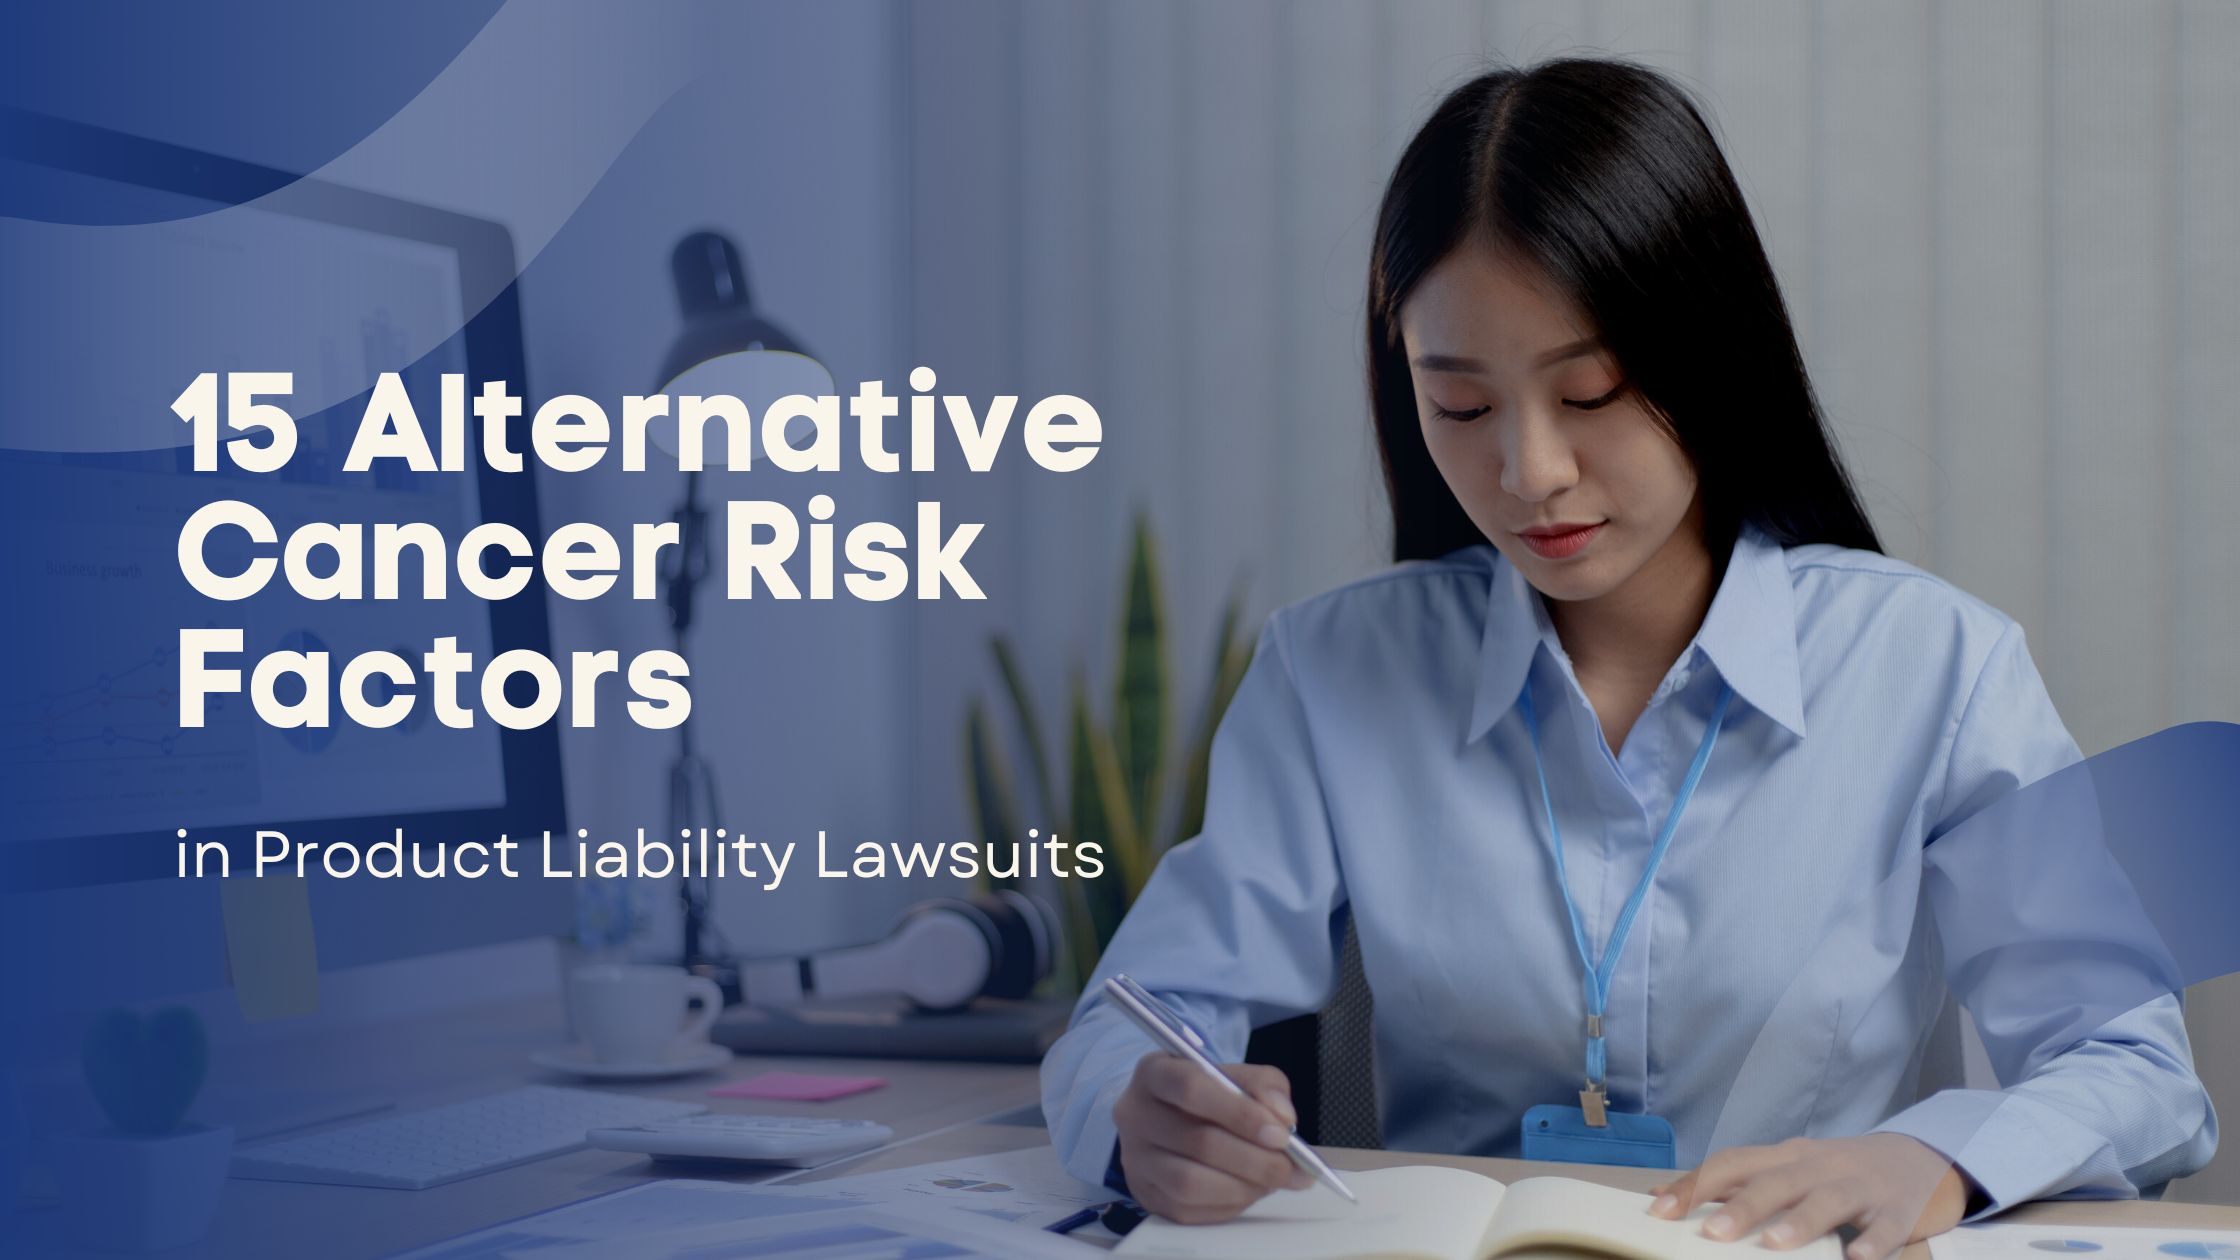 15 Alternative Cancer Risk Factors in Product Liability Lawsuits